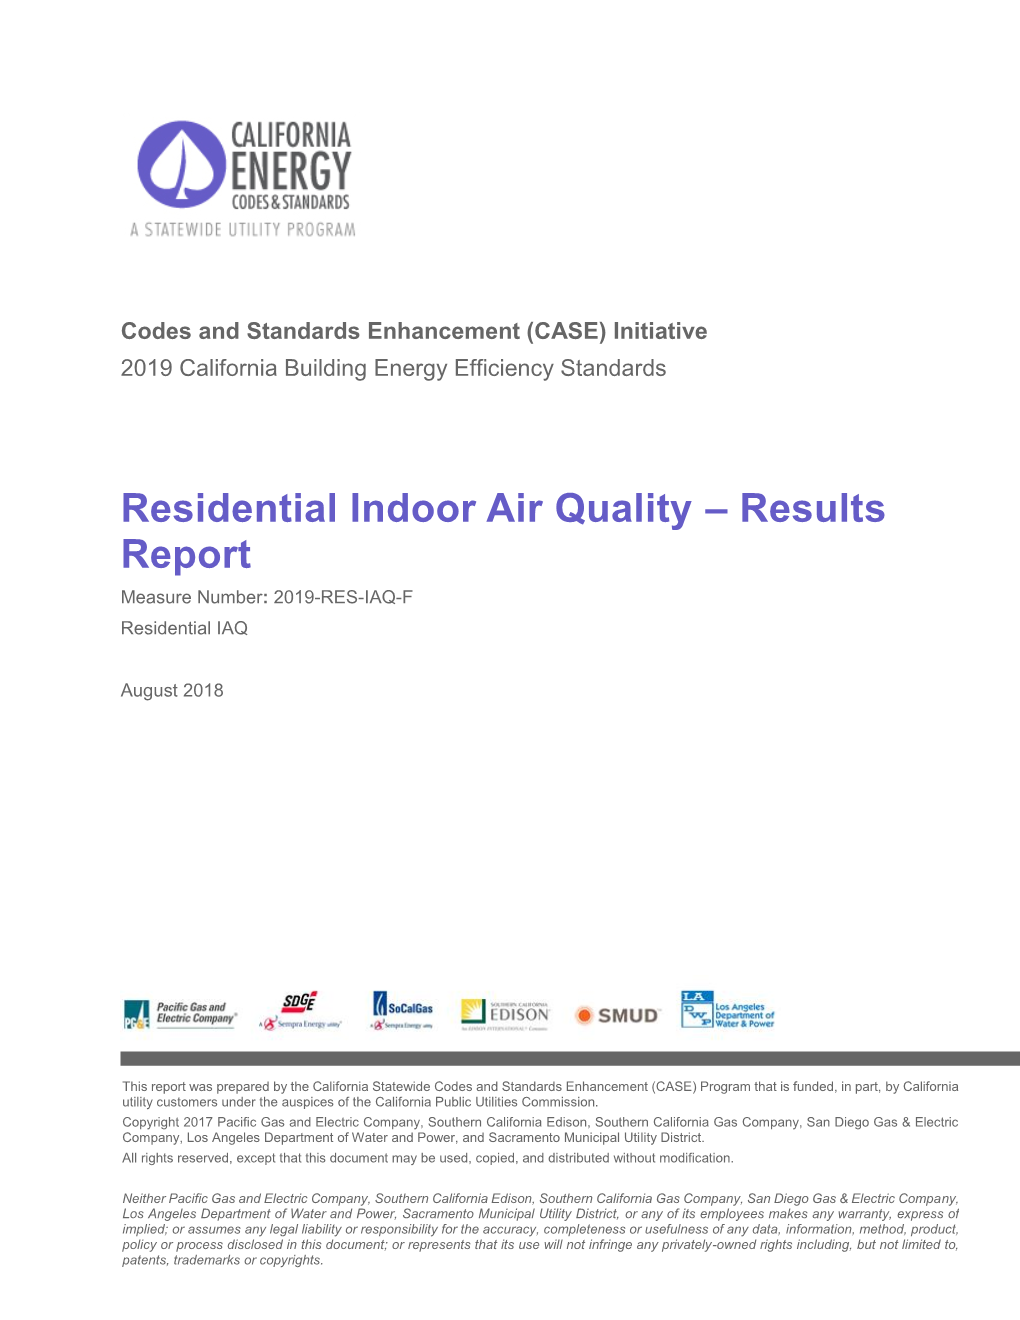 Residential Indoor Air Quality – Results Report Measure Number: 2019-RES-IAQ-F Residential IAQ